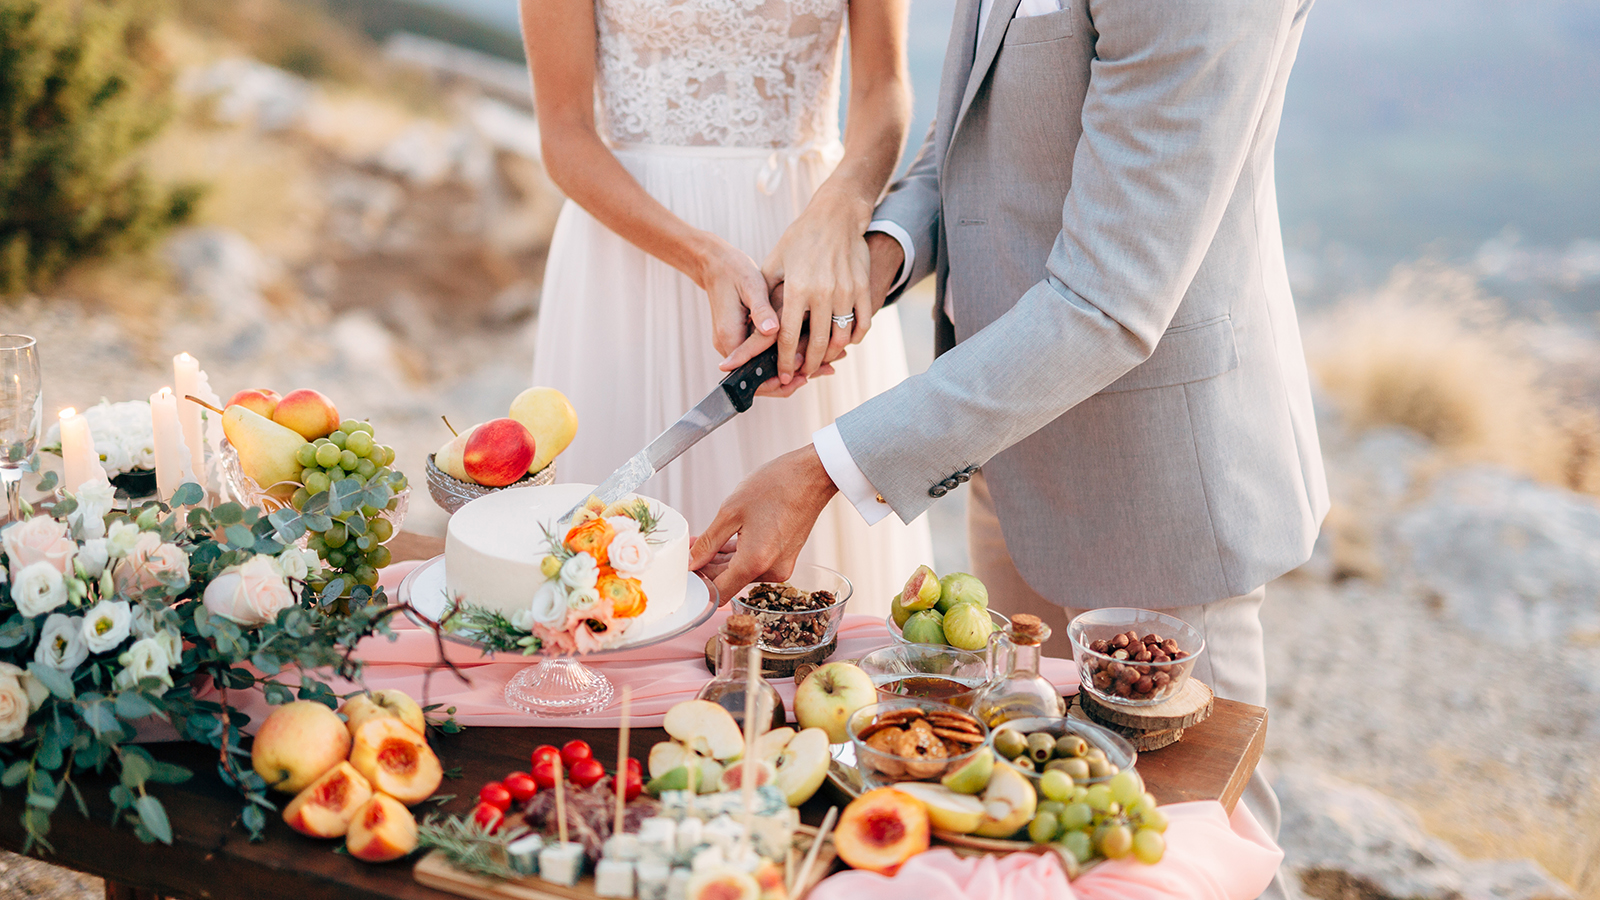 The bride and groom are cutting a cake during a buffet table after the wedding ceremony on Mount Lovcen, close-up